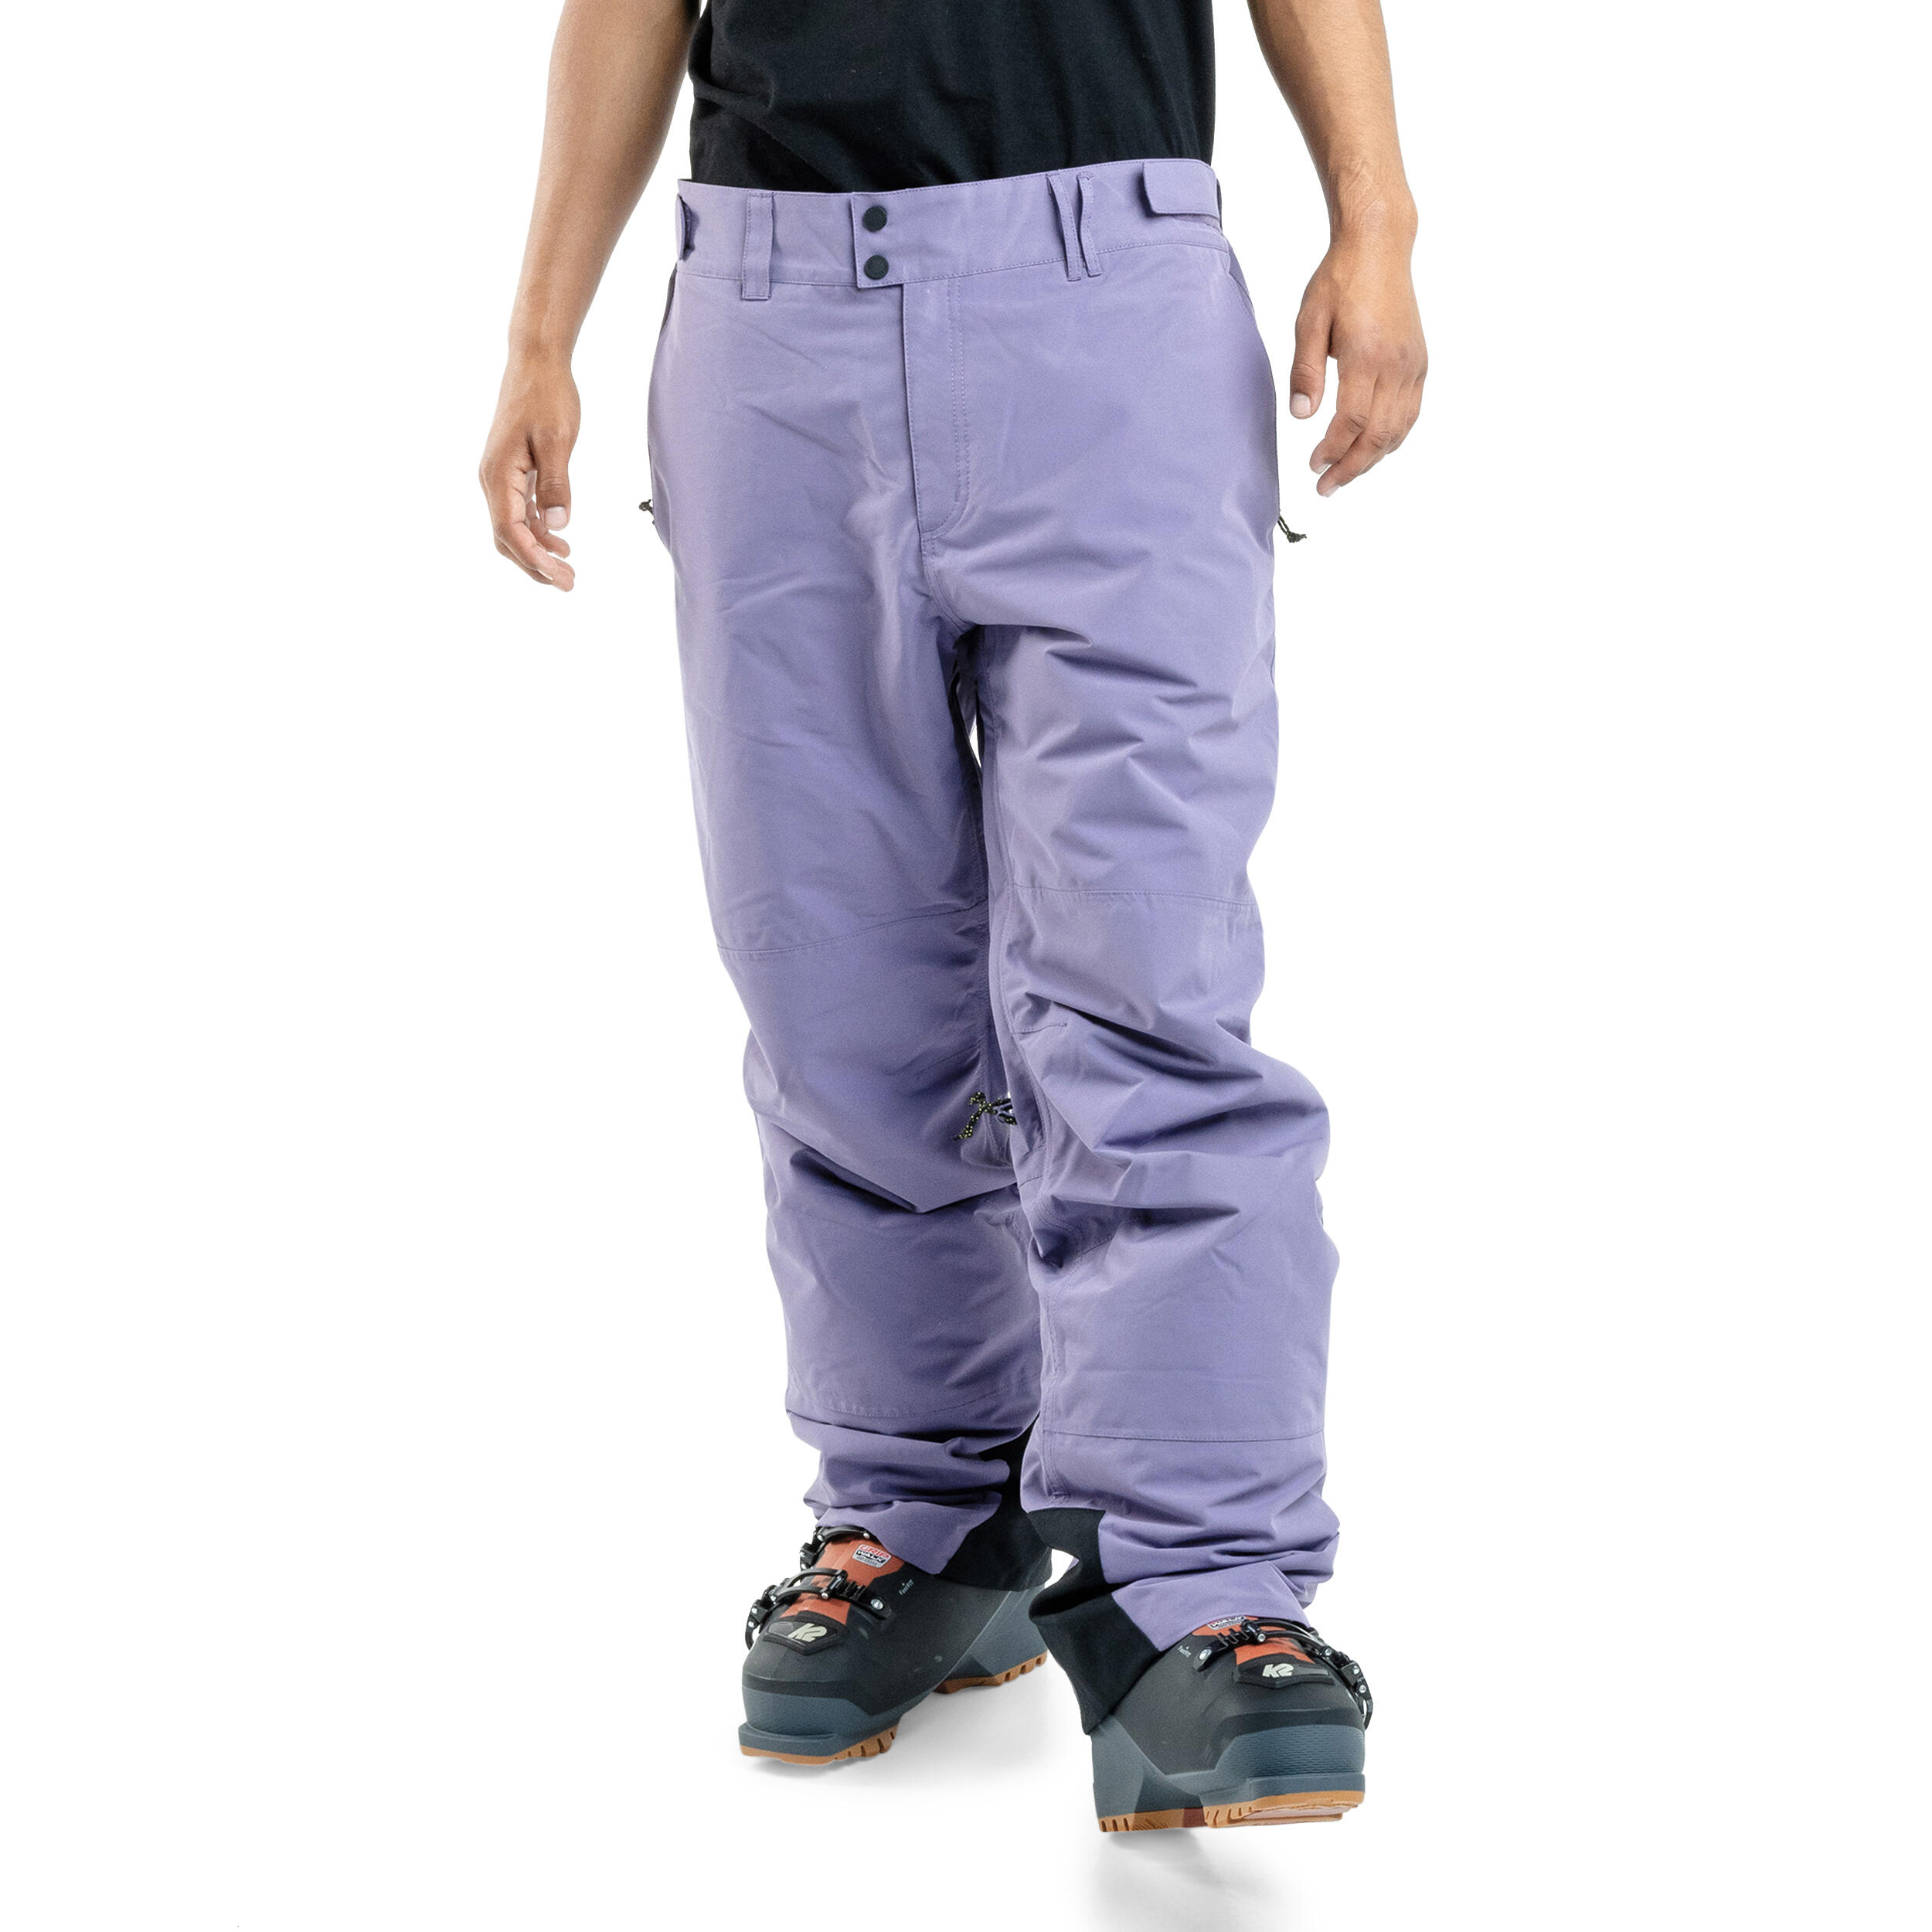 Planks Easy Rider Men's Ski Pants in Steep Purple with Pockets - Sports Trousers 1/4